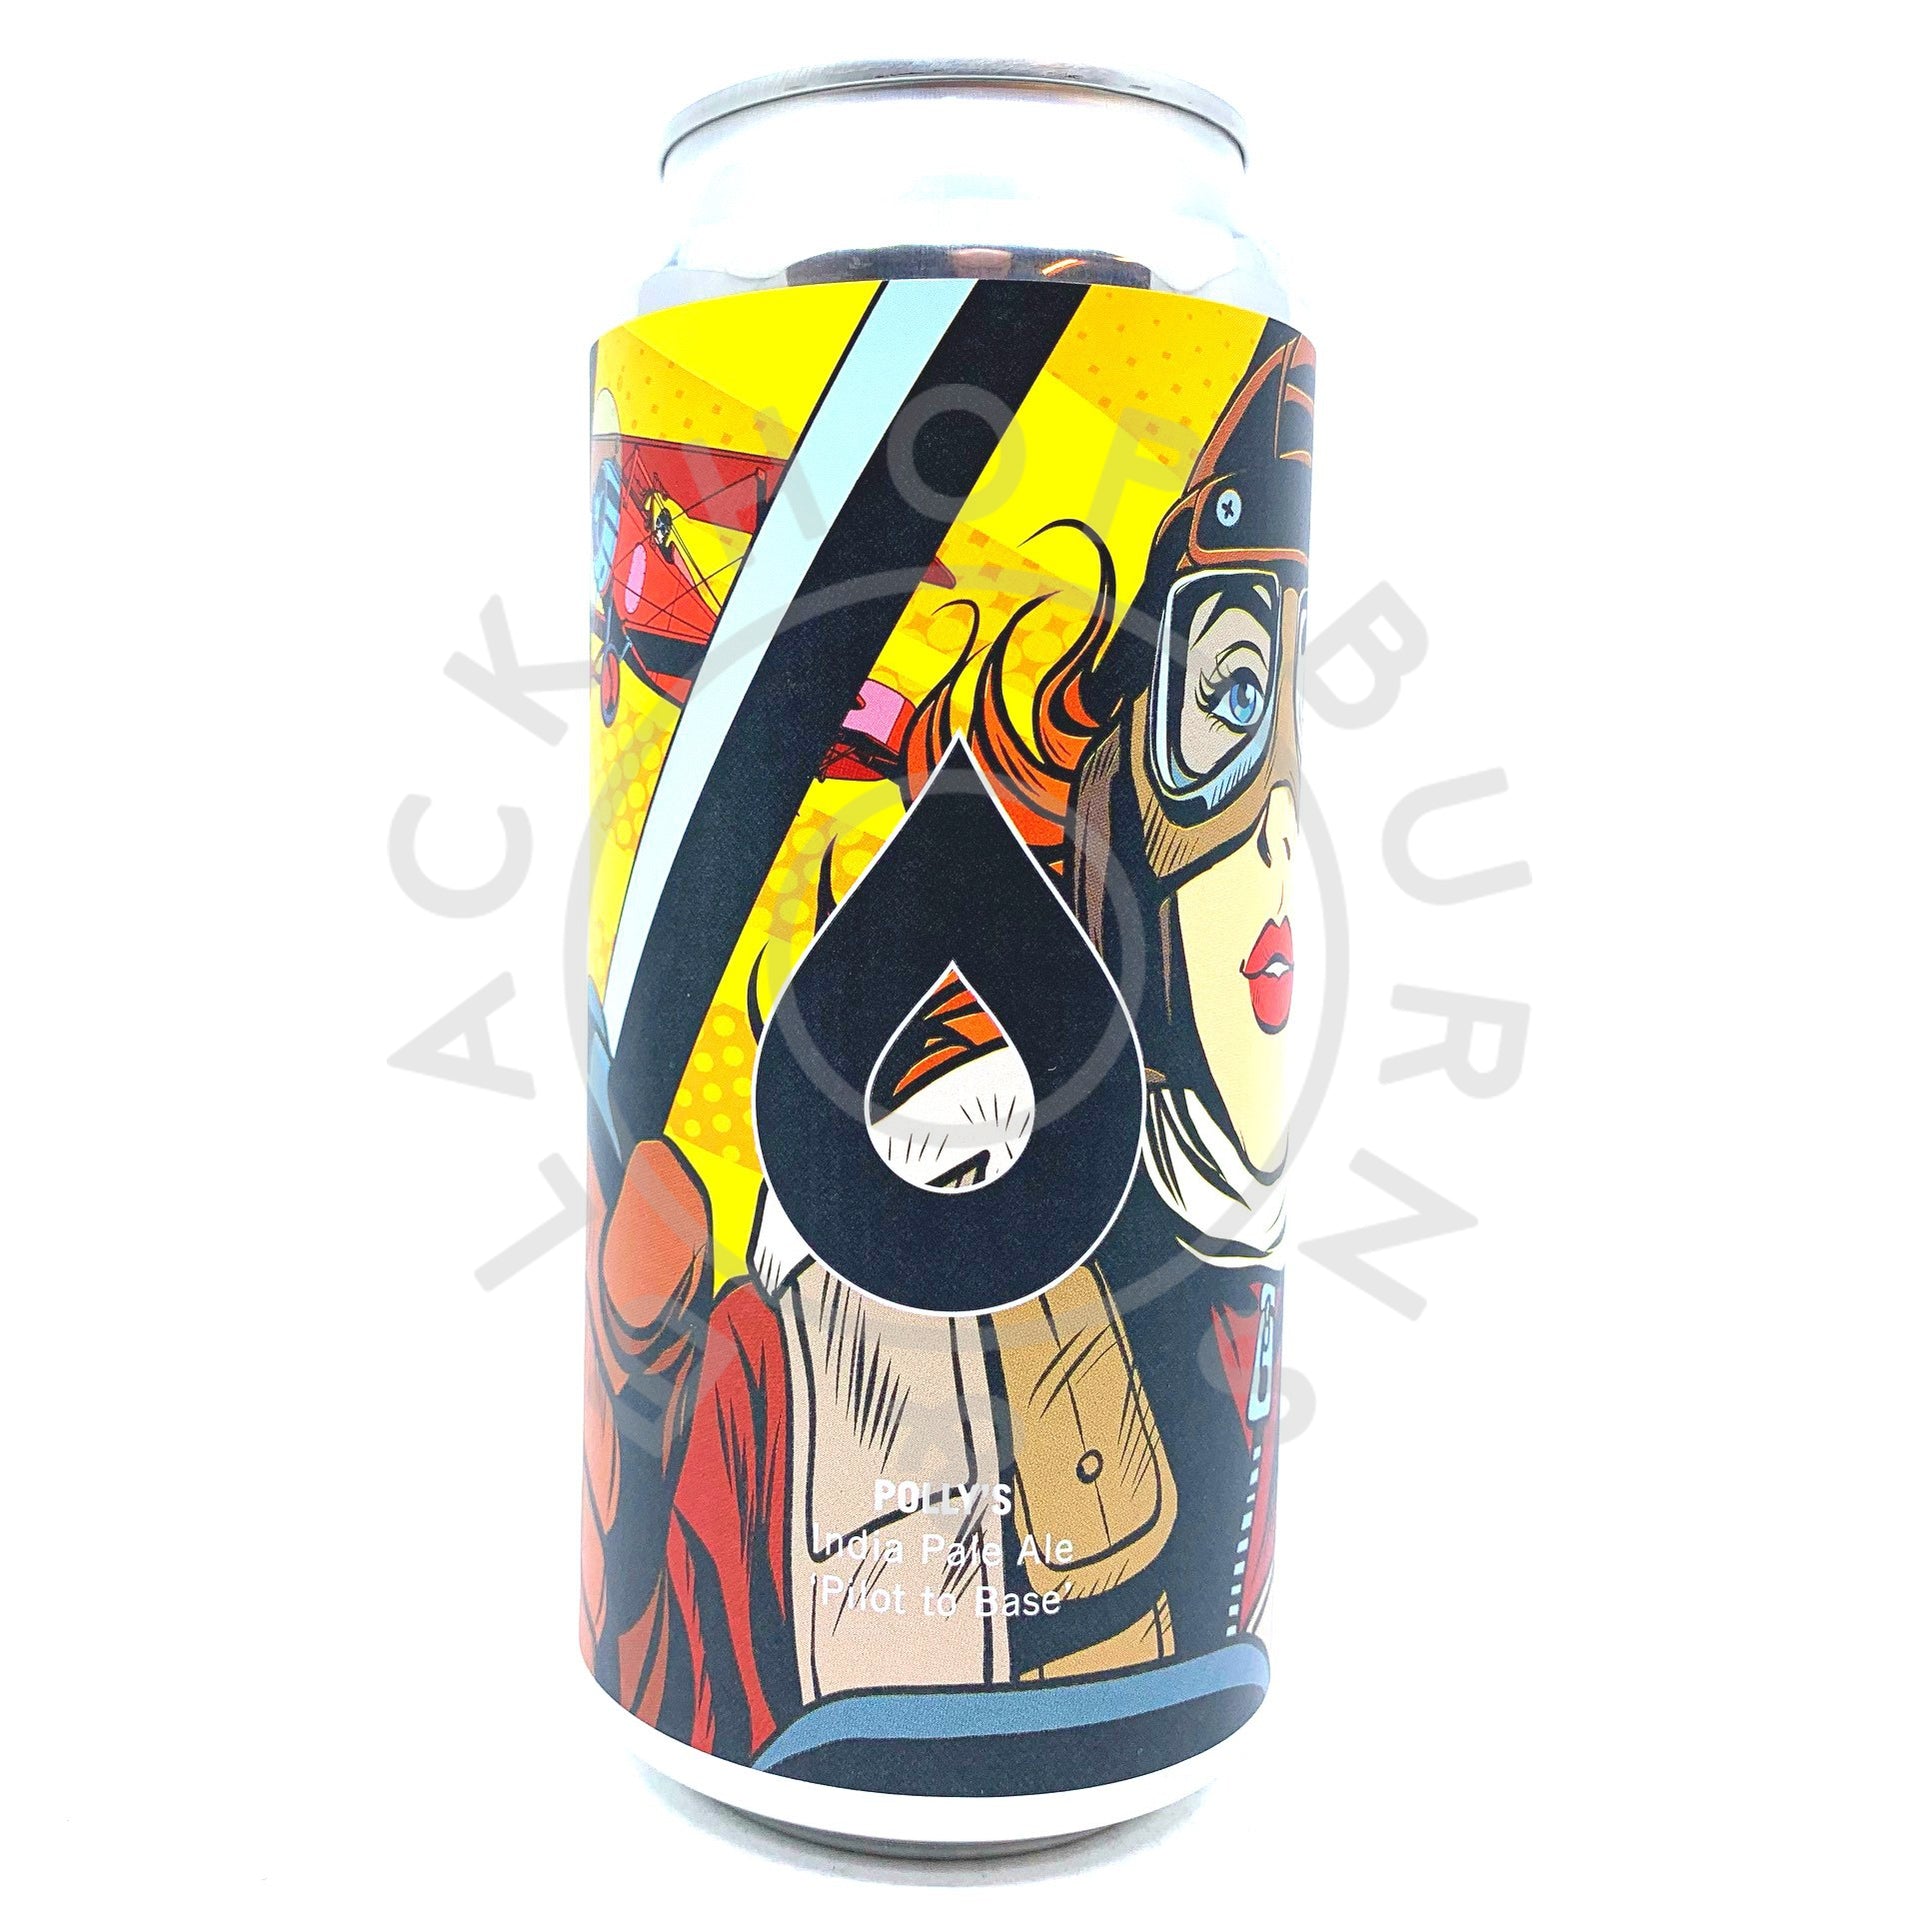 Polly's Brew Co Pilot To Base IPA 6.3% (440ml can)-Hop Burns & Black